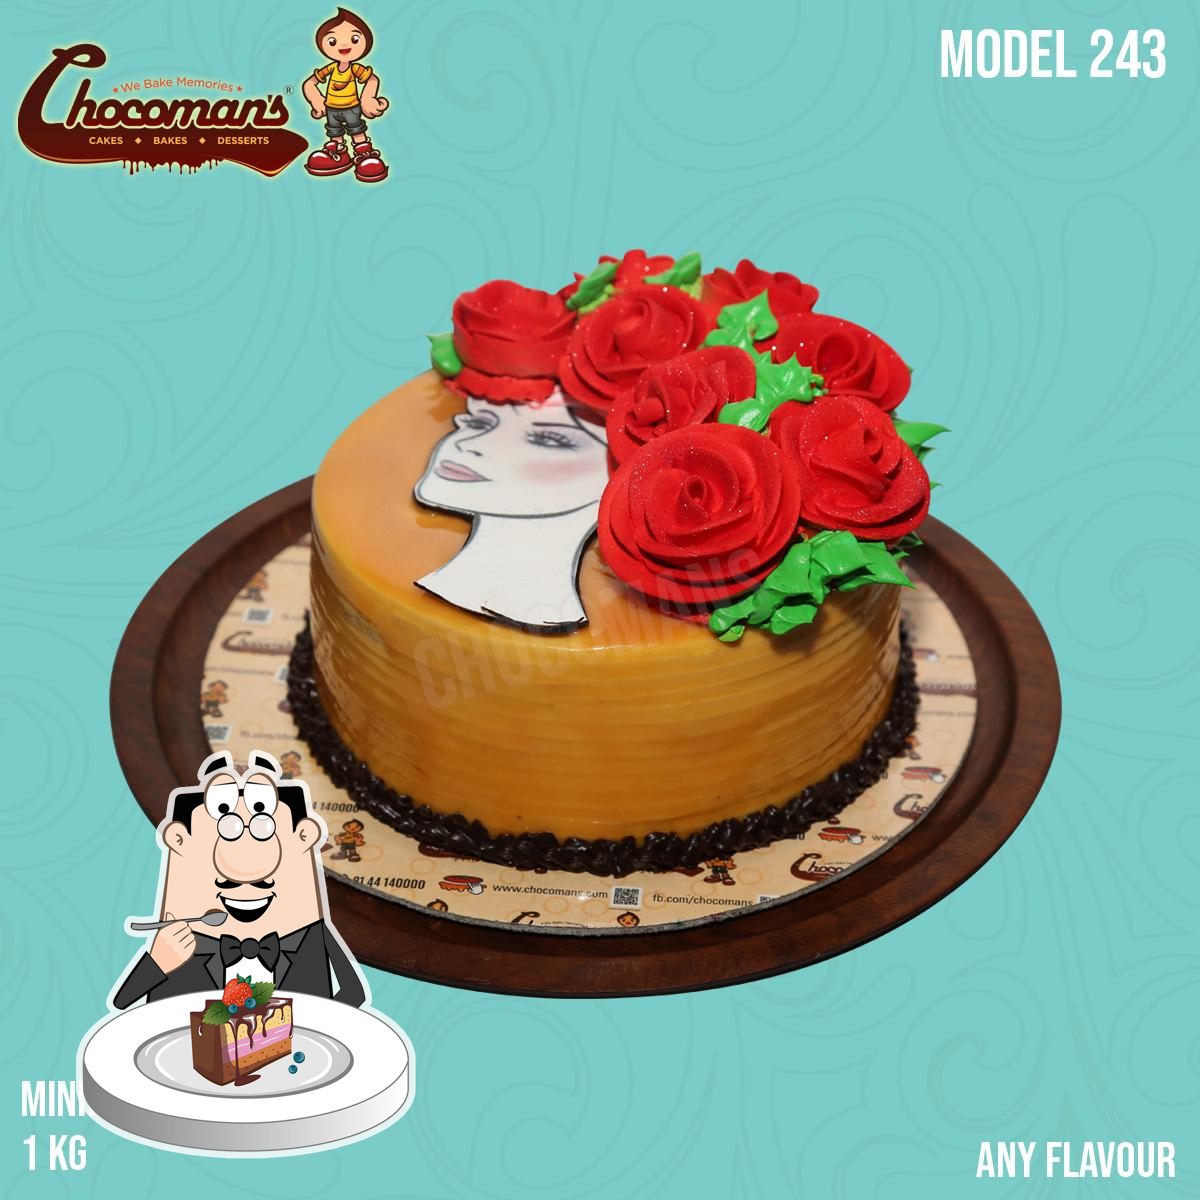 Chocoman's - Order Your 🤩Dream House🏡 Cake🍰 Now With... | Facebook